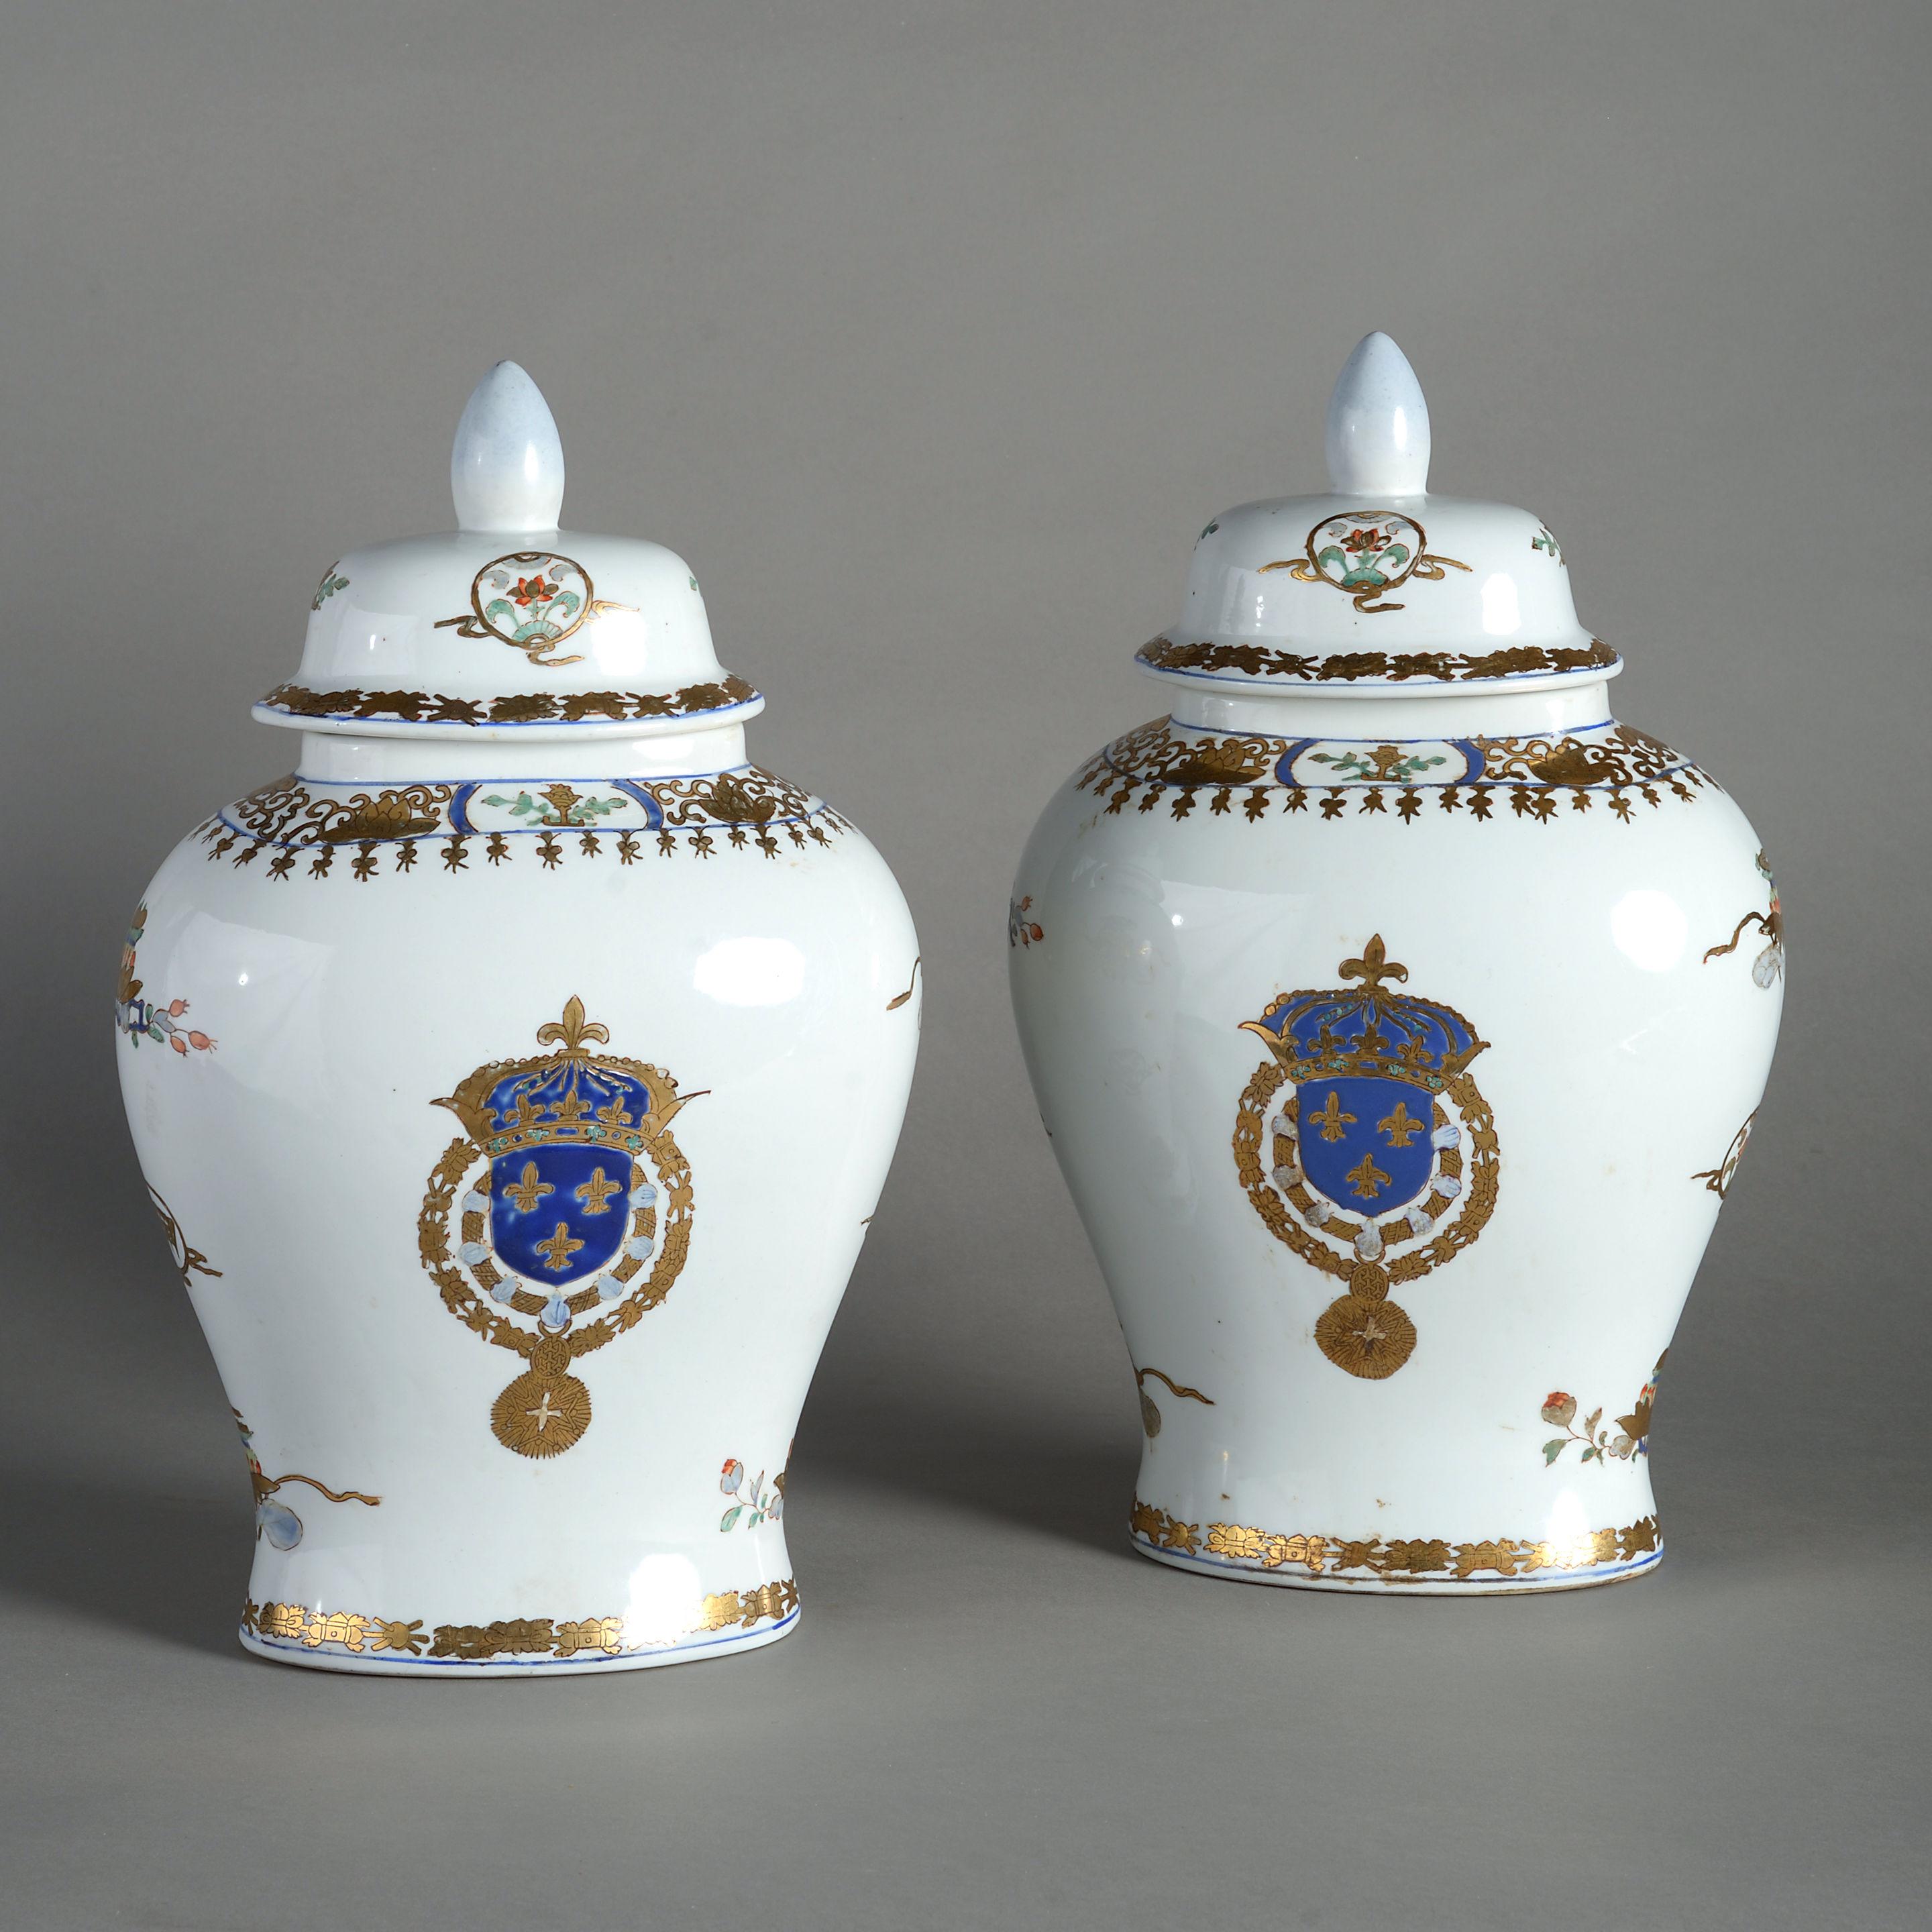 A pair of late nineteenth century Samson porcelain vases and covers, the bodies decorated with gilded red green and blue glazes on a white ground and depicting the royal arms of France.